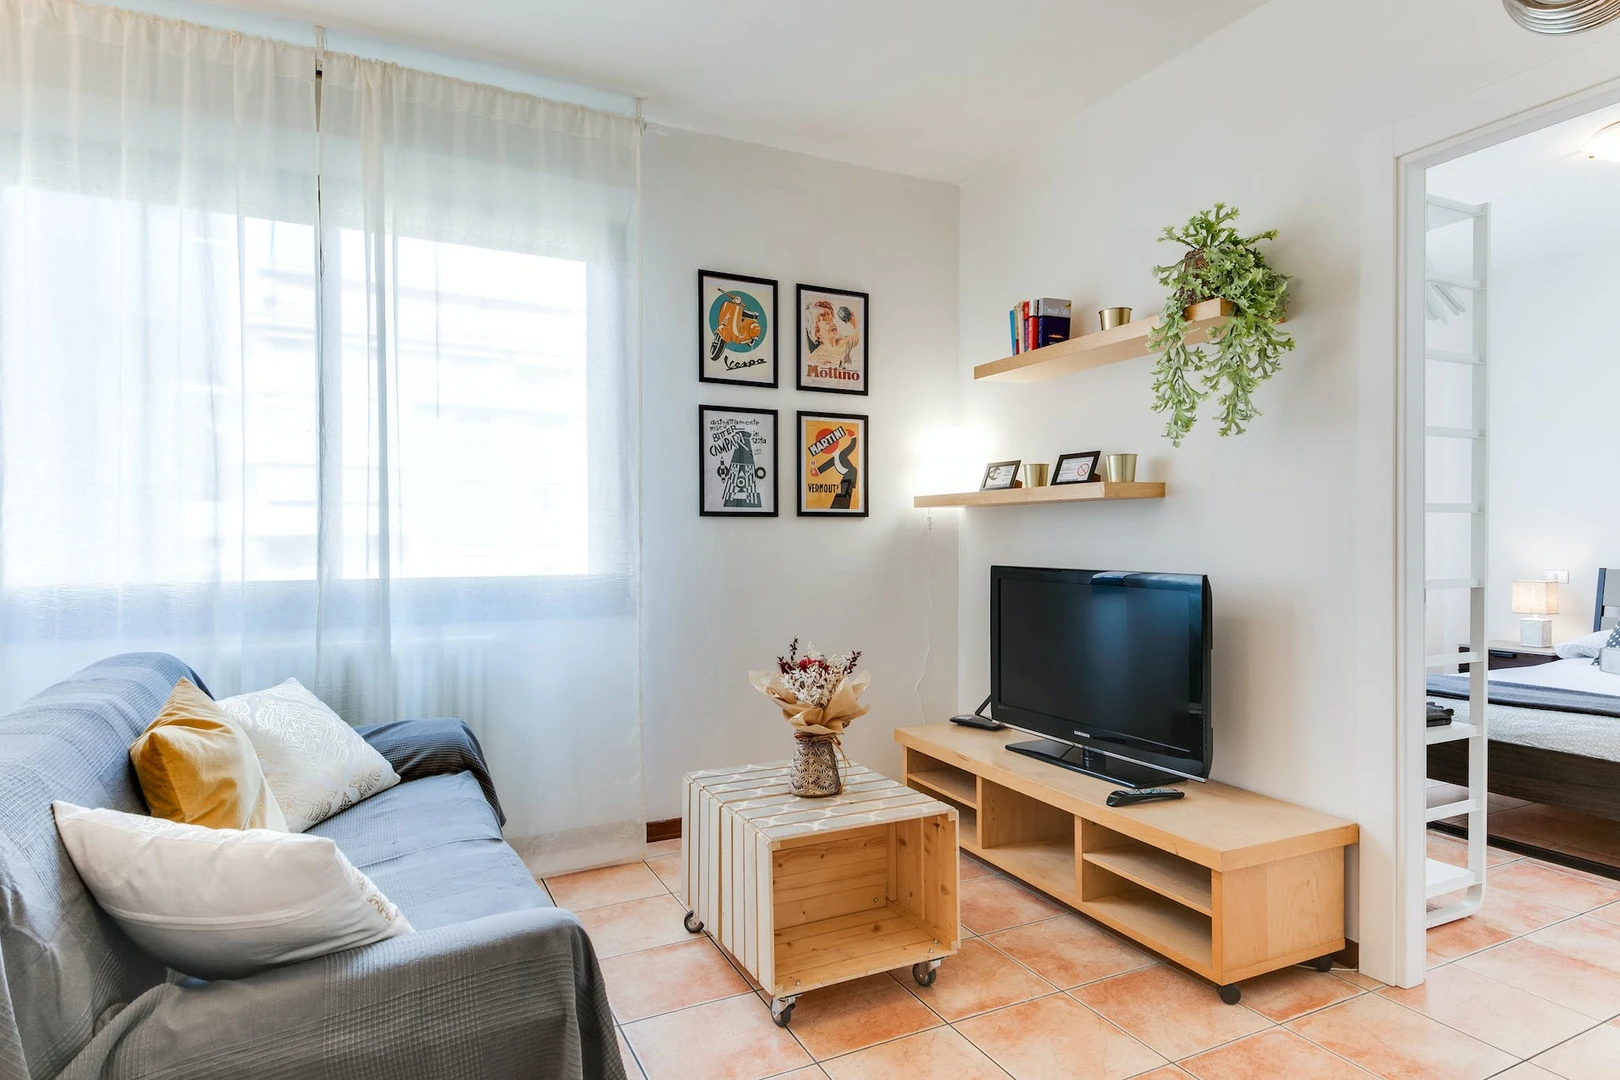 Accommodation in the centre of Forlì